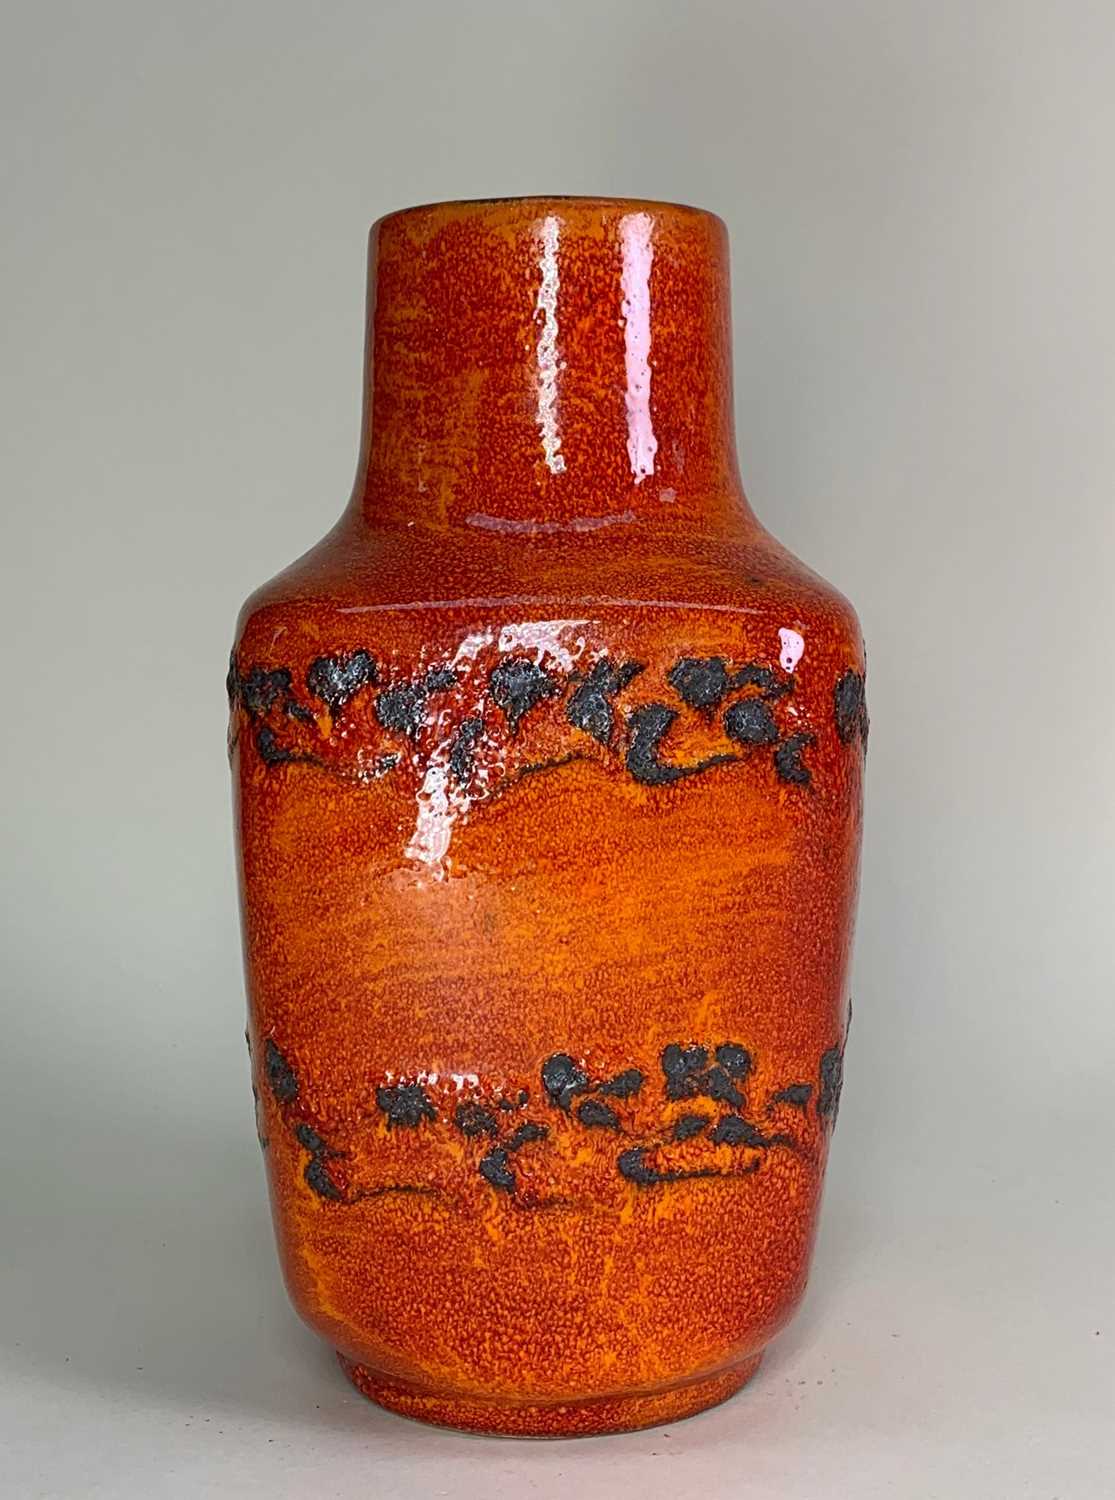 MID CENTURY POTTERY WGP KERAMICS COLLECTION including one Scheurich 275-28 solid red glazed vase - Image 4 of 20